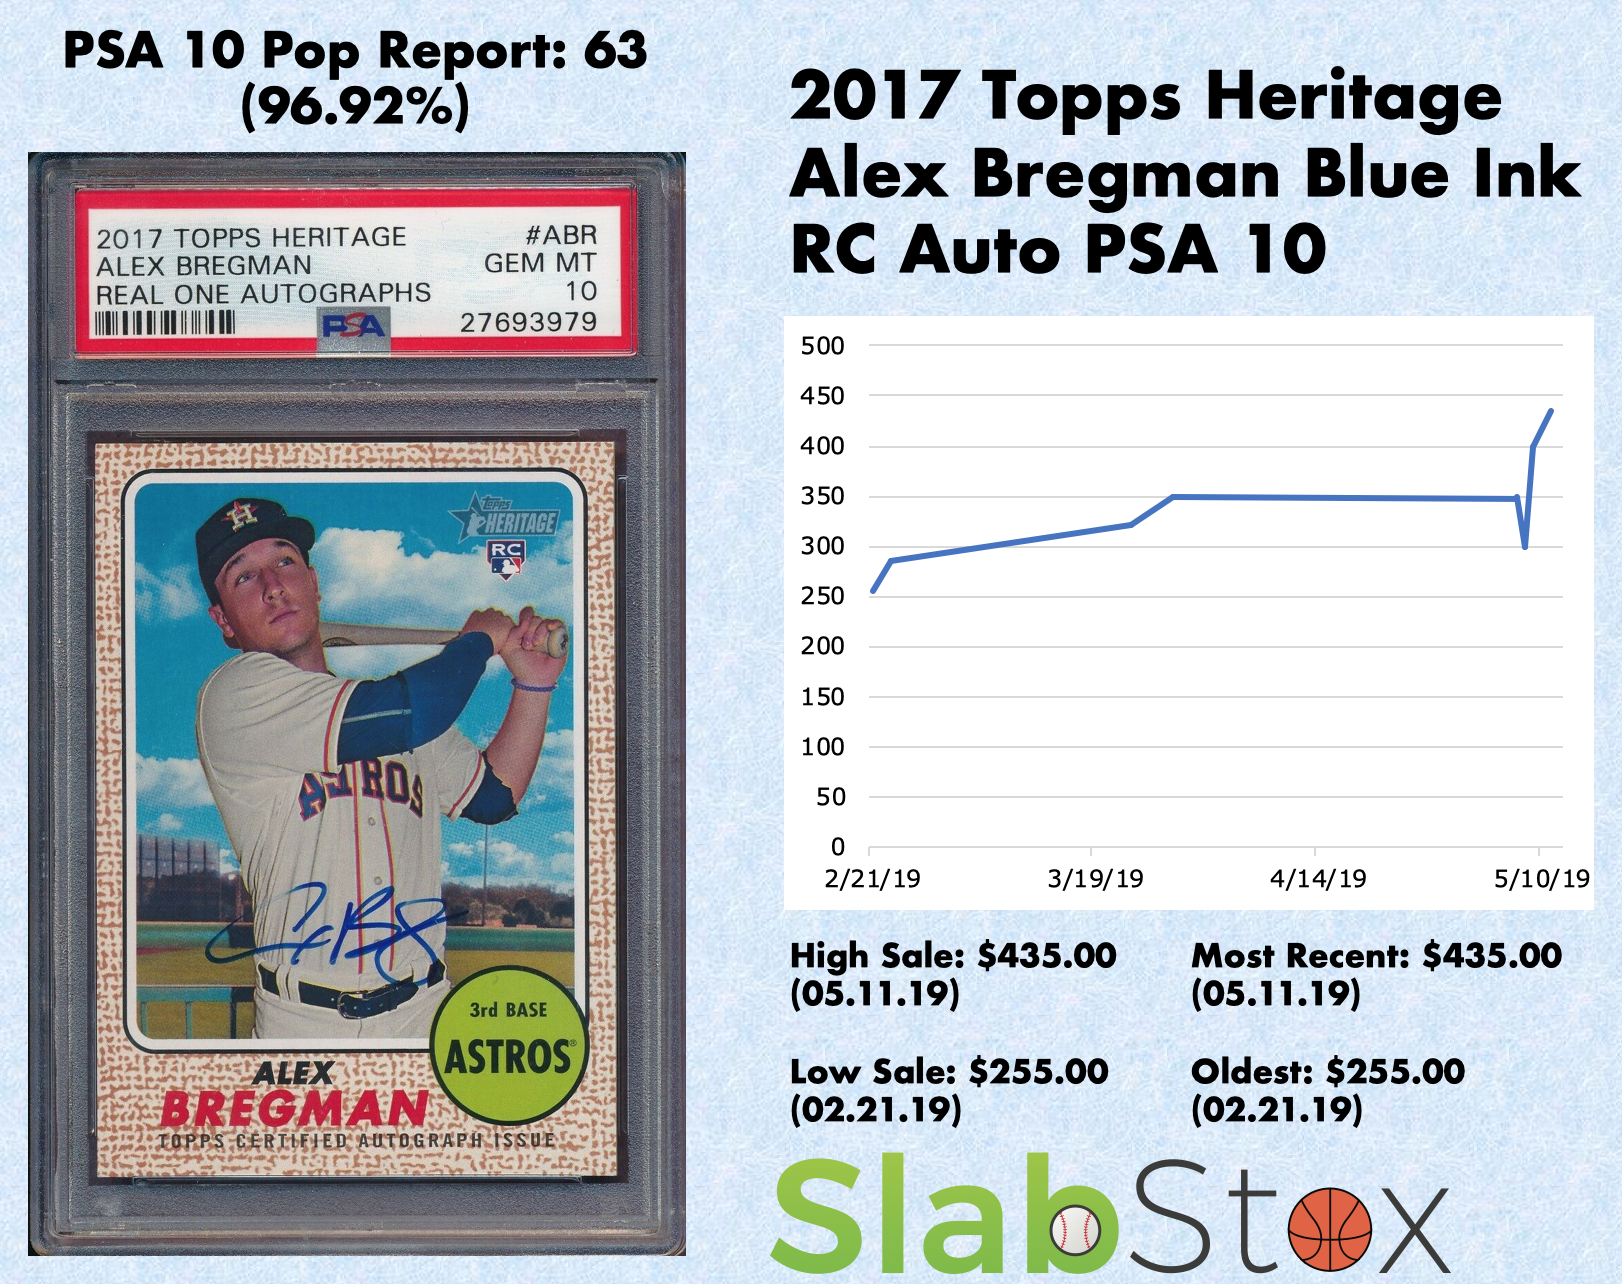 SlabStox infographic for 2017 Topps Heritage Alex Bregman Blue Ink RC Auto PSA 10 sports trading card